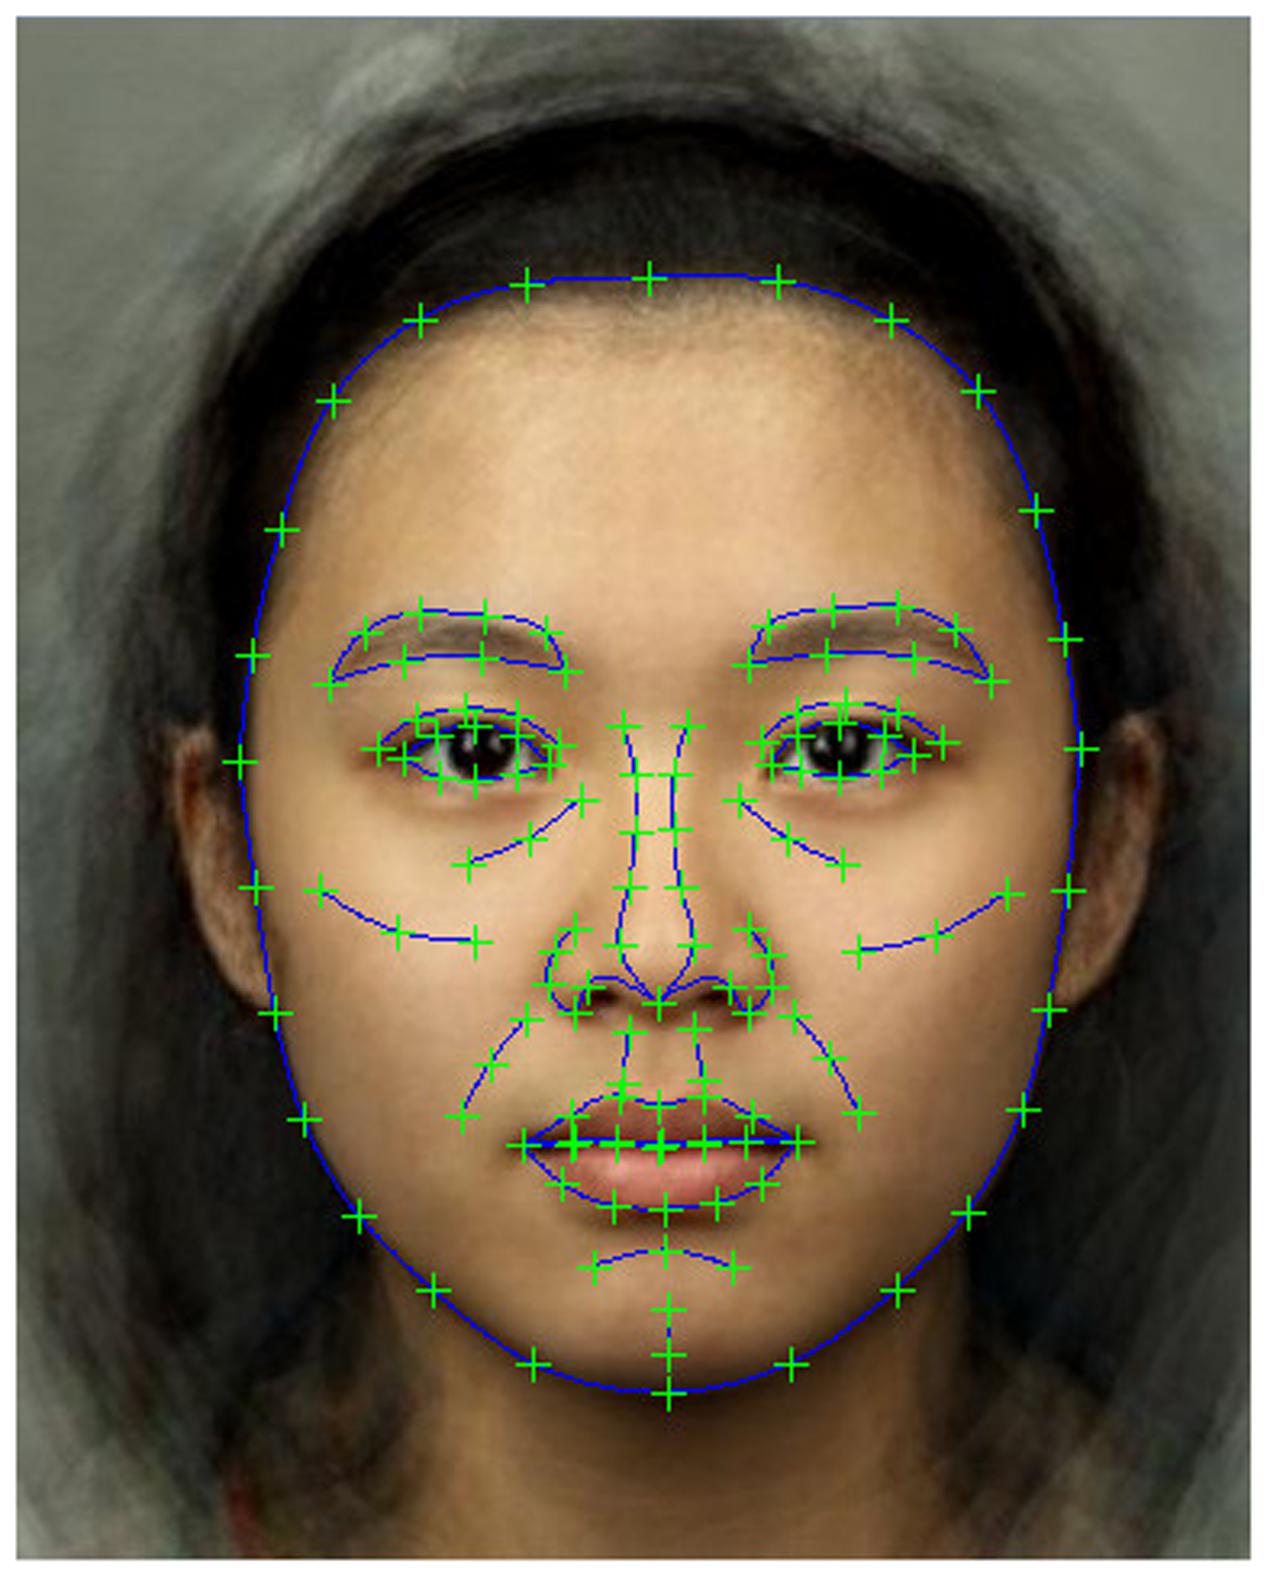 Frontiers Facial Shape Analysis Identifies Valid Cues To Aspects